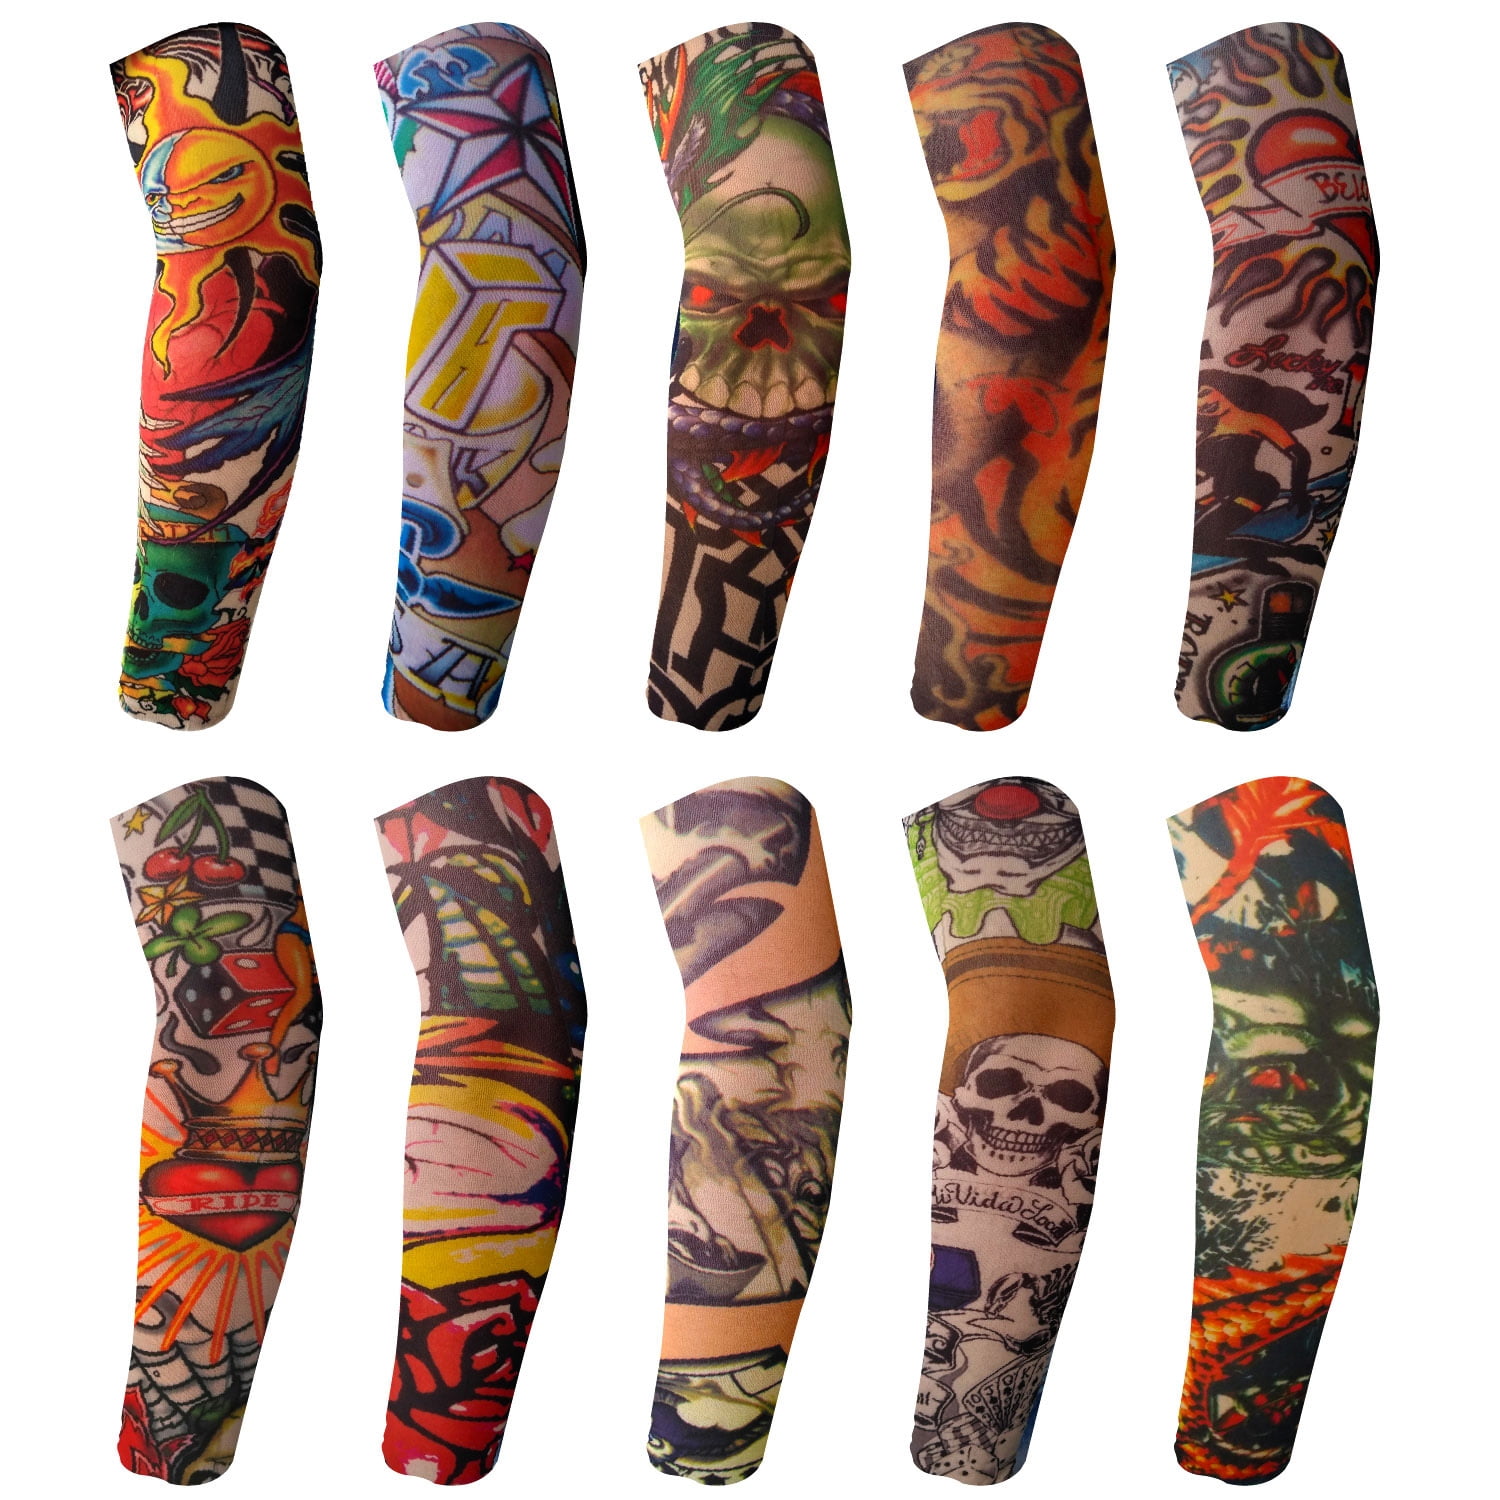 Halloween Adult Tattoo Sleeve Arm Stocking Guitar Design Costume Party Large New 